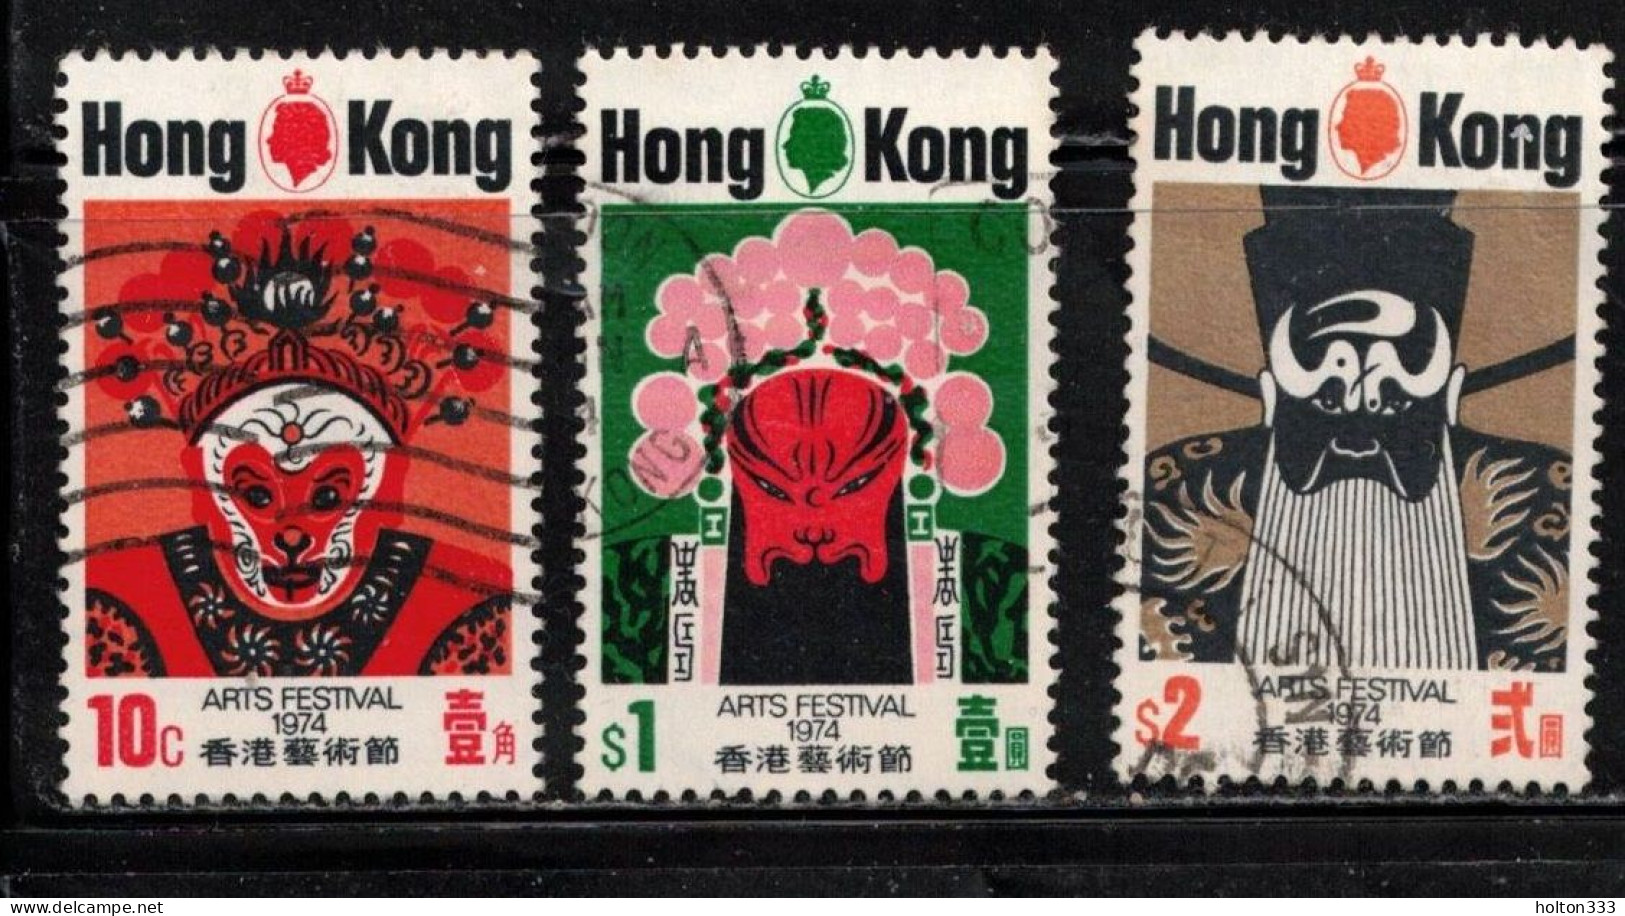 HONG KONG Scott # 296-8 Used - Arts Festival 1974 - Used Stamps